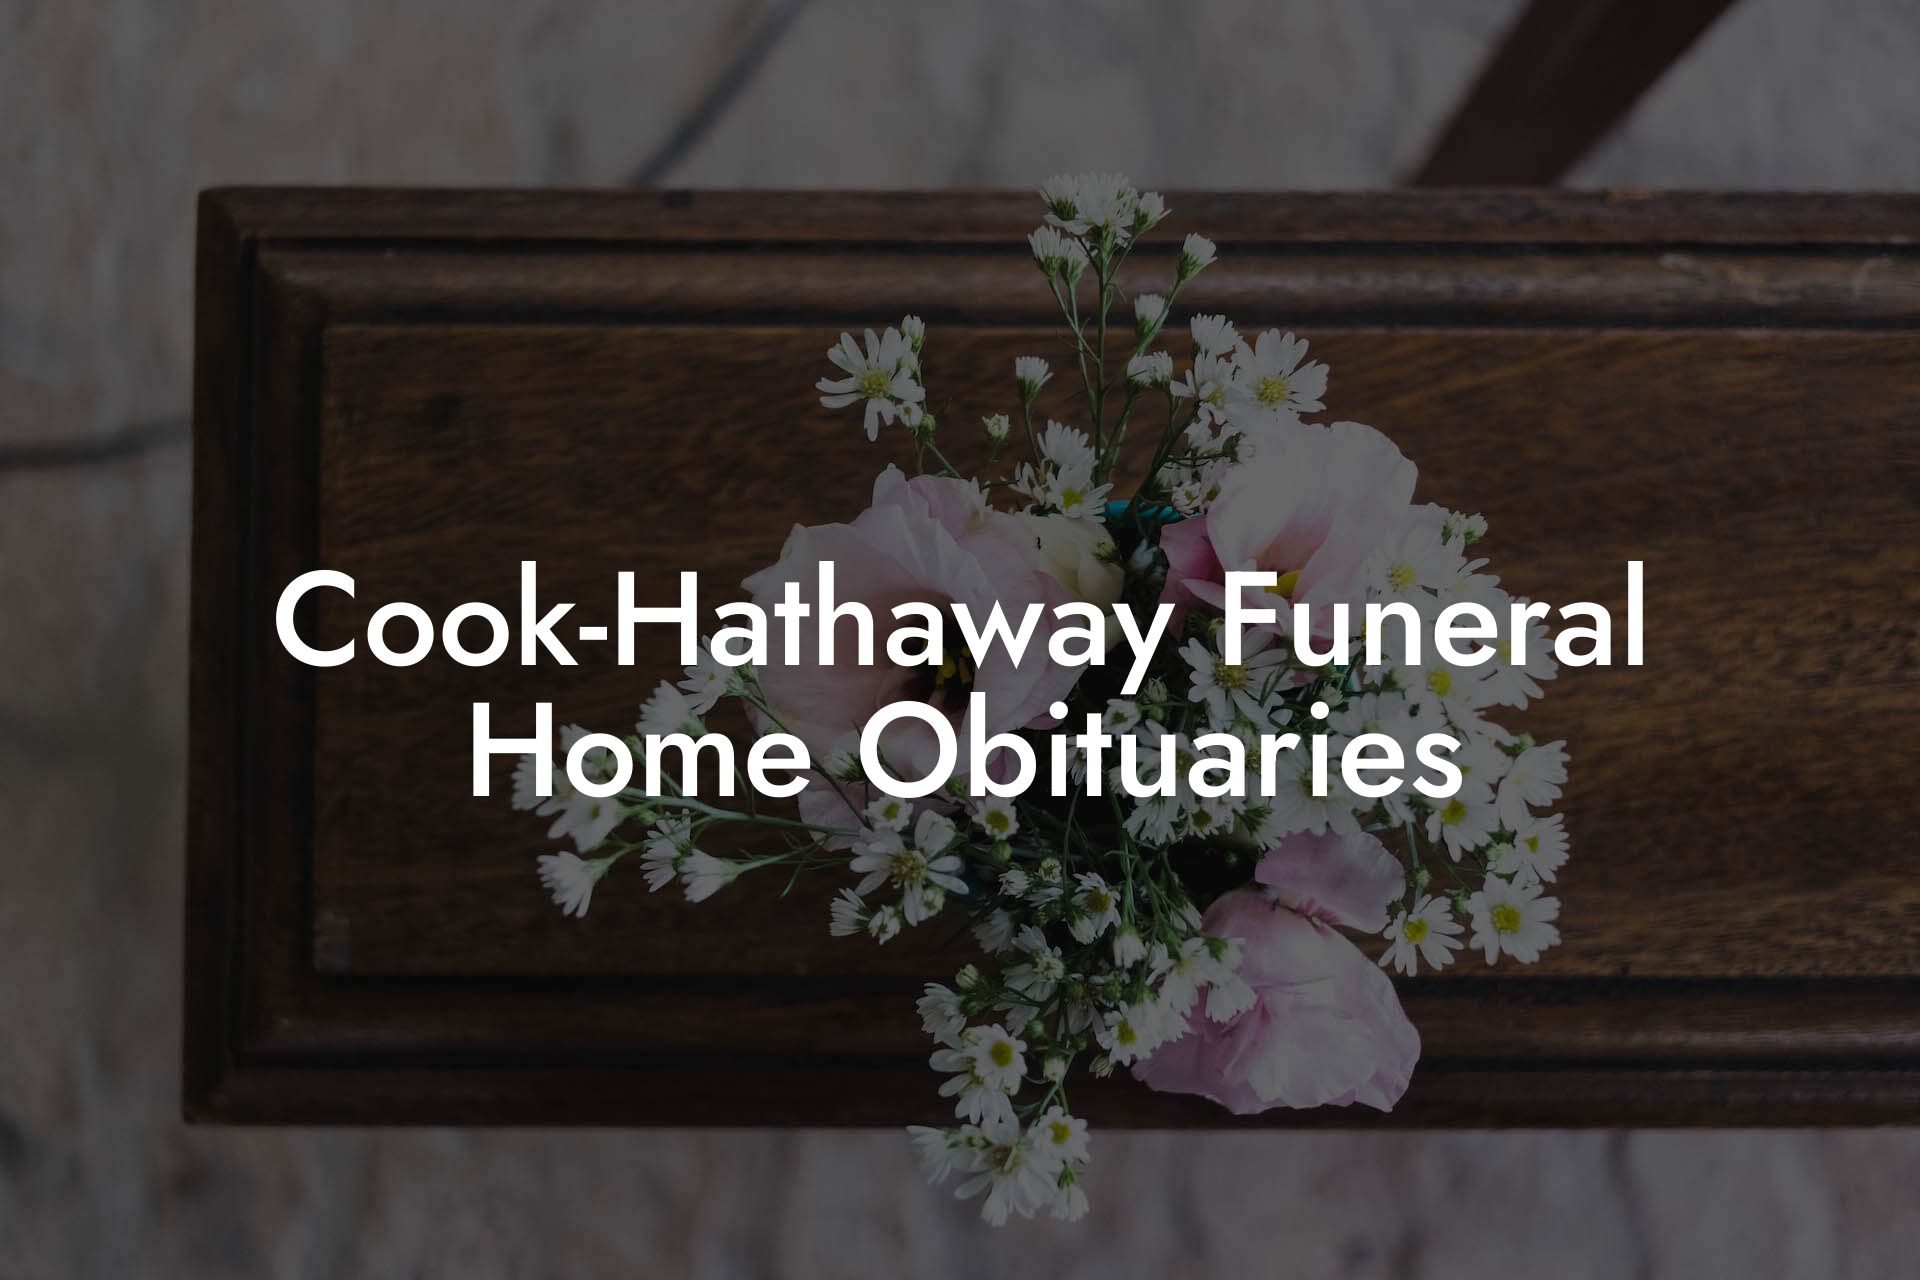 Cook-Hathaway Funeral Home Obituaries